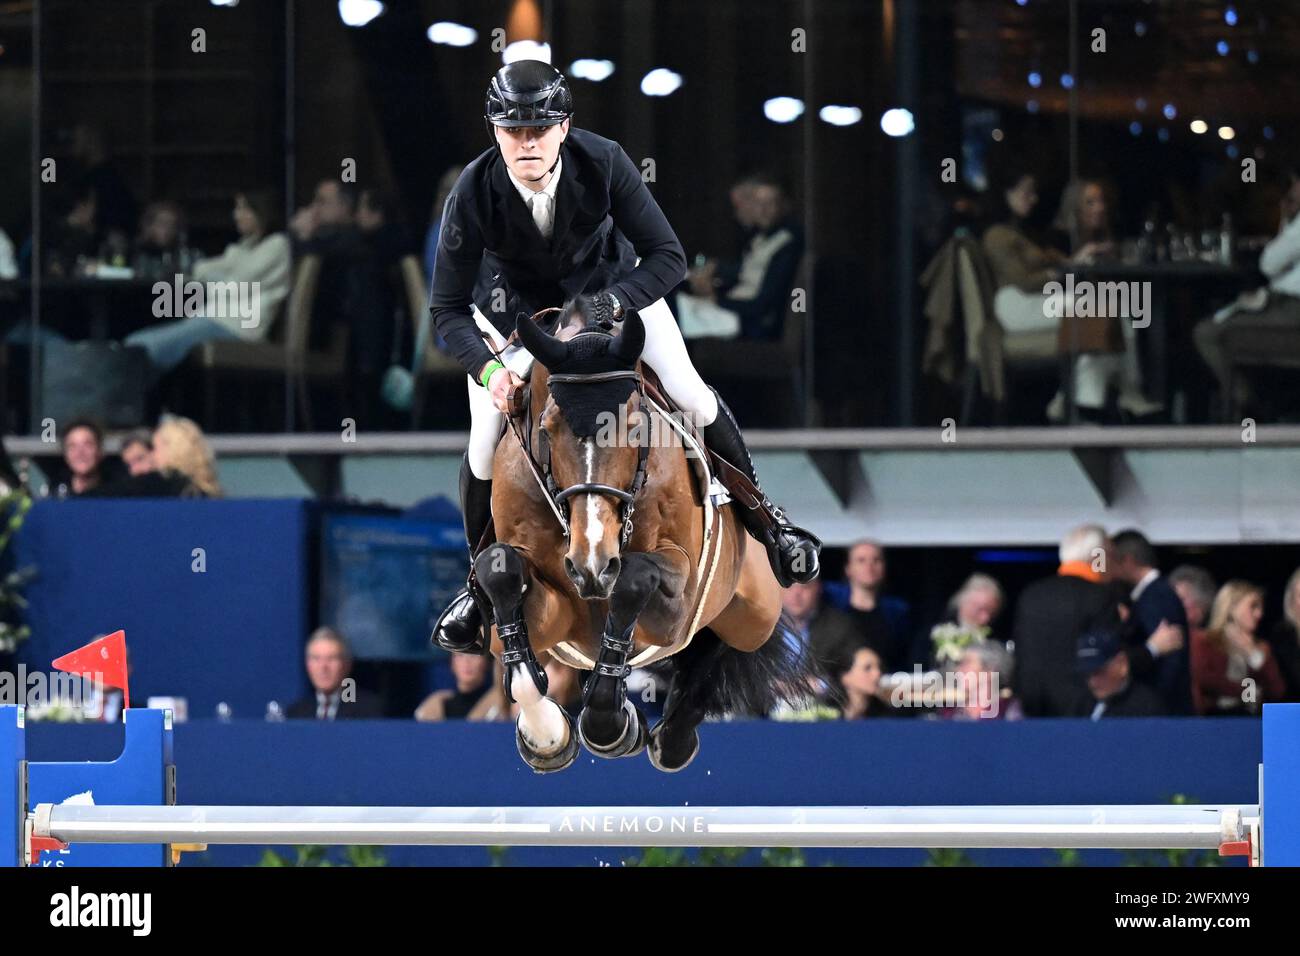 AMSTERDAM - Dominik Juffinger with Diachacco during the Longines FEI Jumping World Cup at the Jumping Amsterdam 2024 tournament at the RAI on January 28, 2024 in Amsterdam, the Netherlands. ANP | Hollandse Hoogte | GERRIT VAN COLOGNE Stock Photo